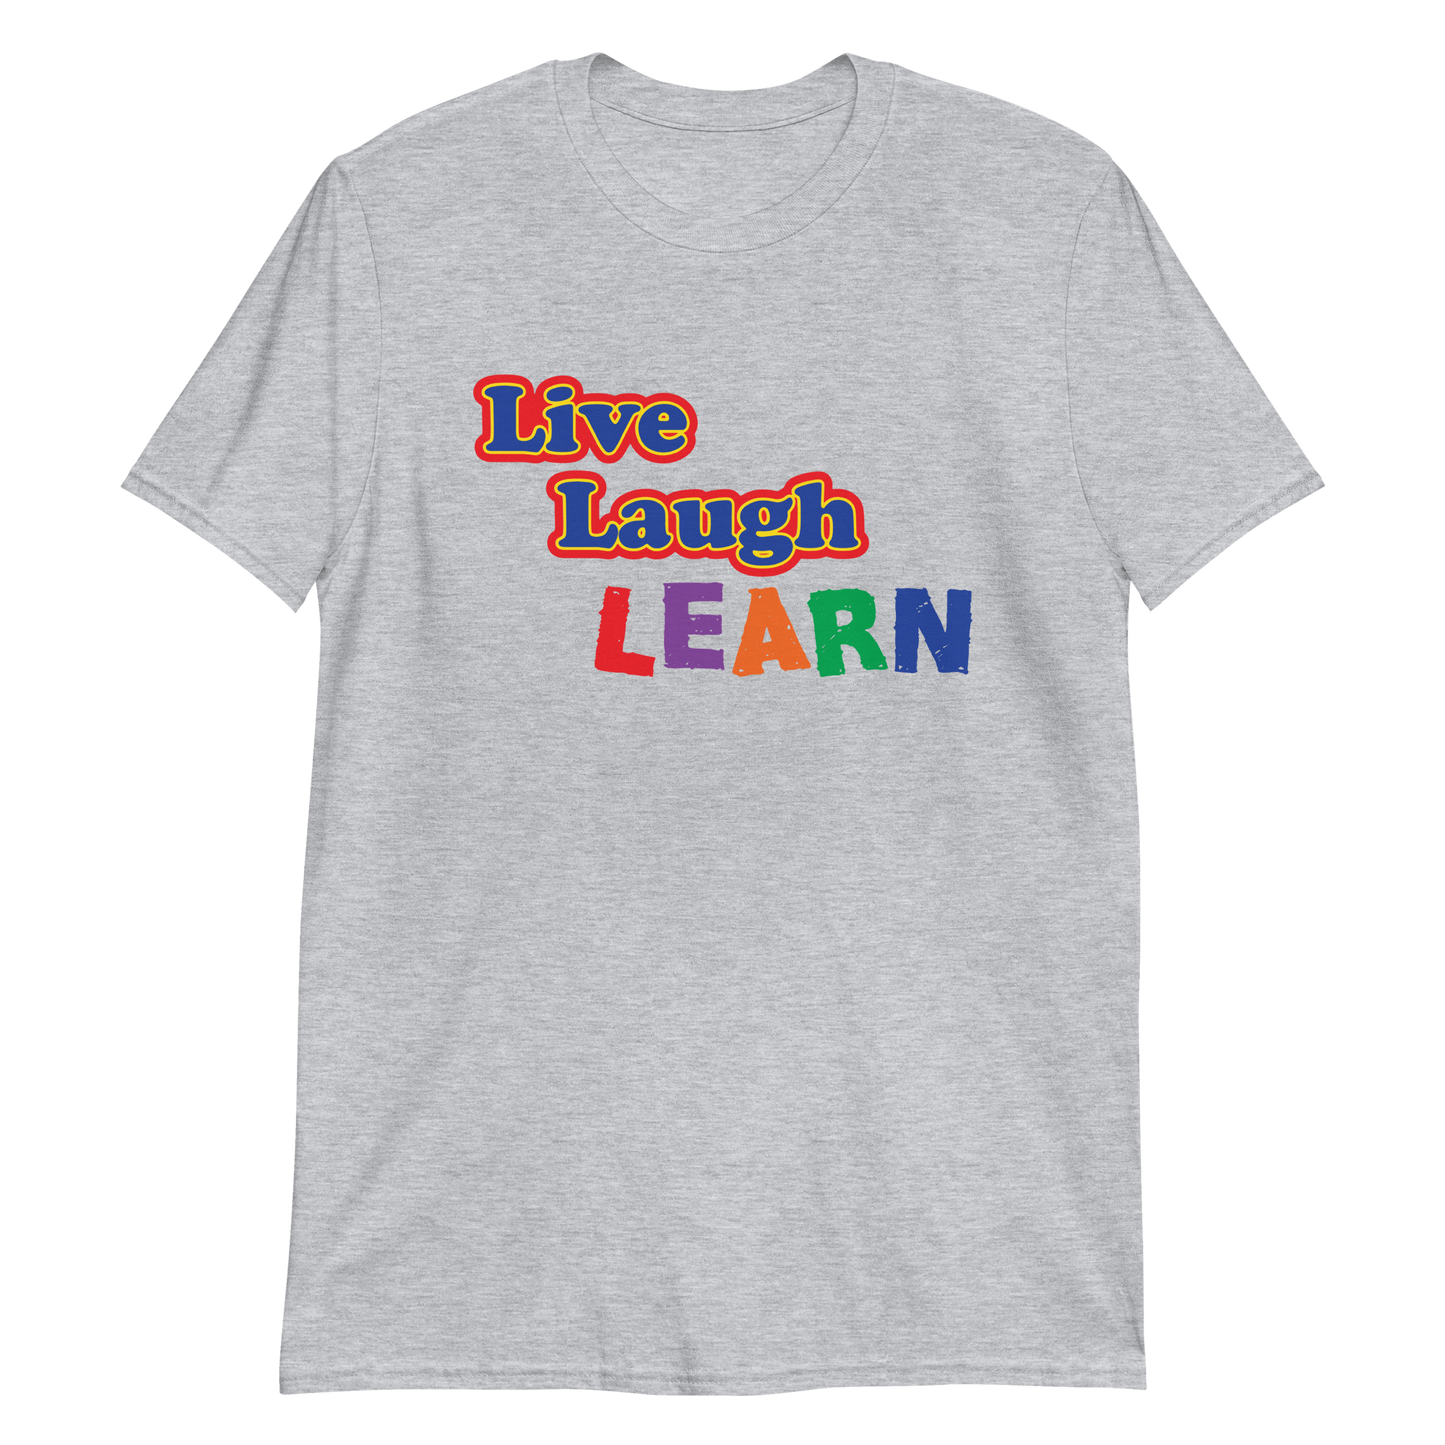 Live, Laugh, Learn.